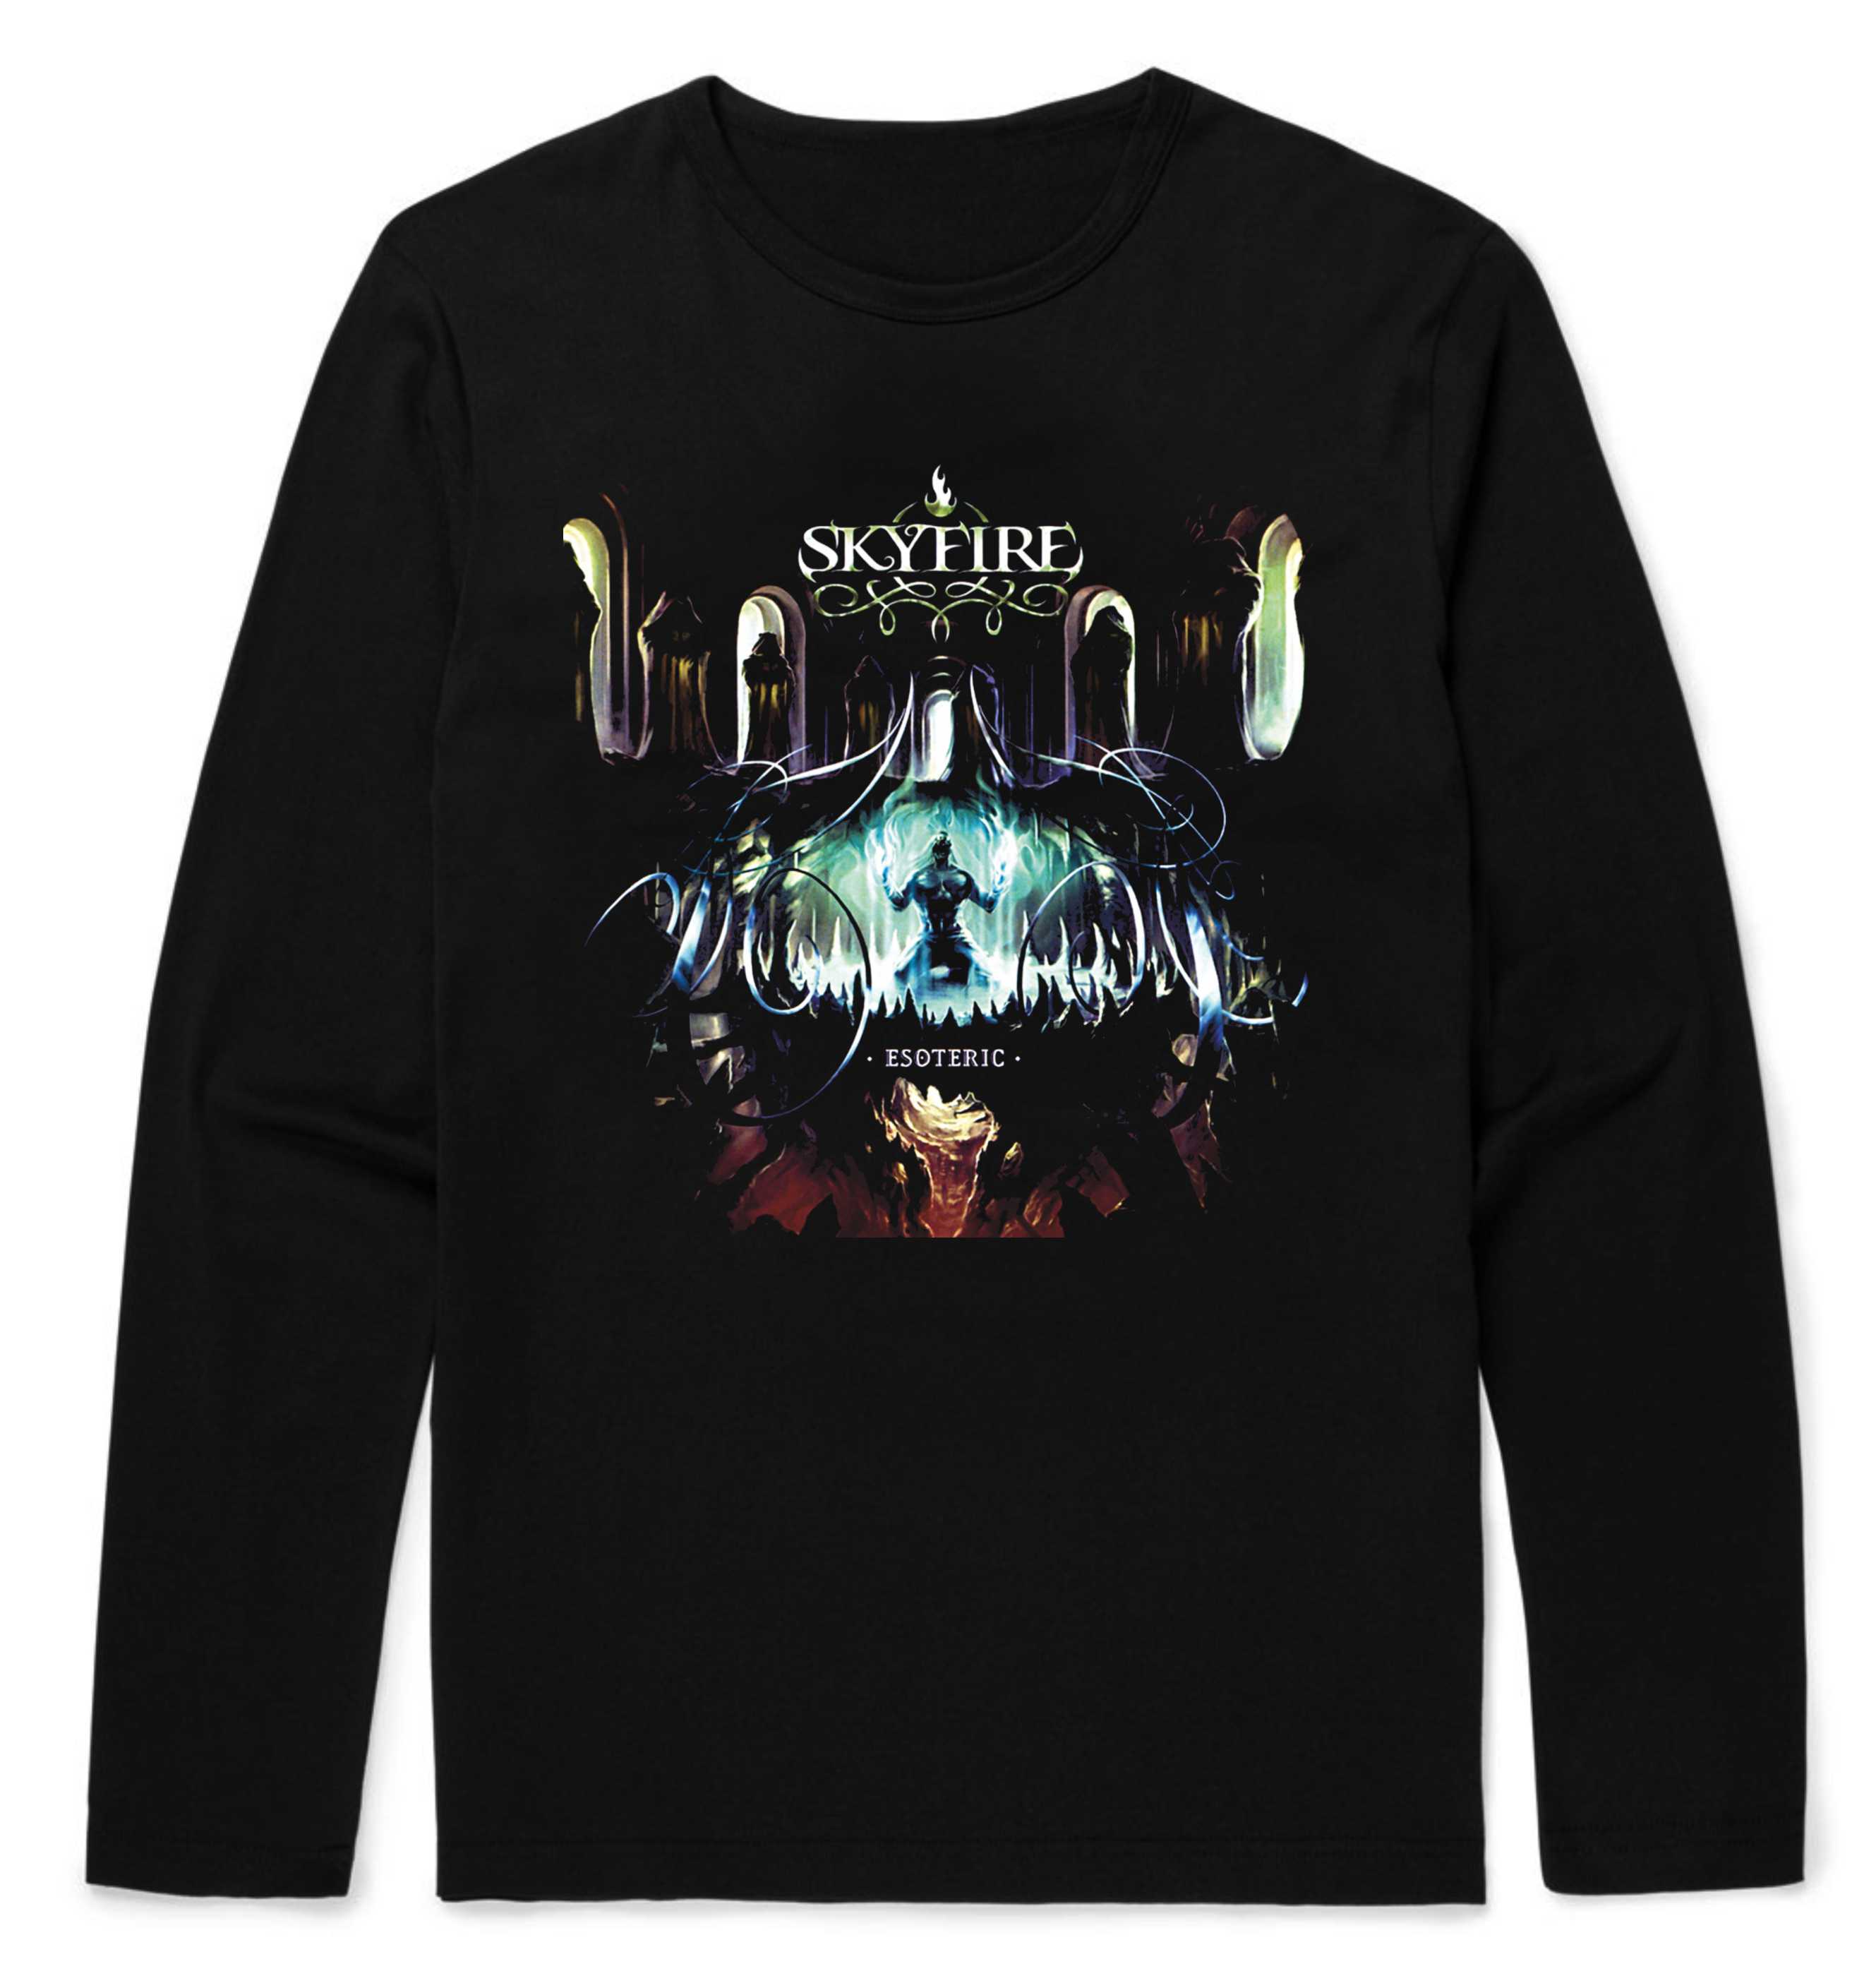 Skyfire Esoteric Longsleeve T-Shirt – Metal & Rock T-shirts and Accessories